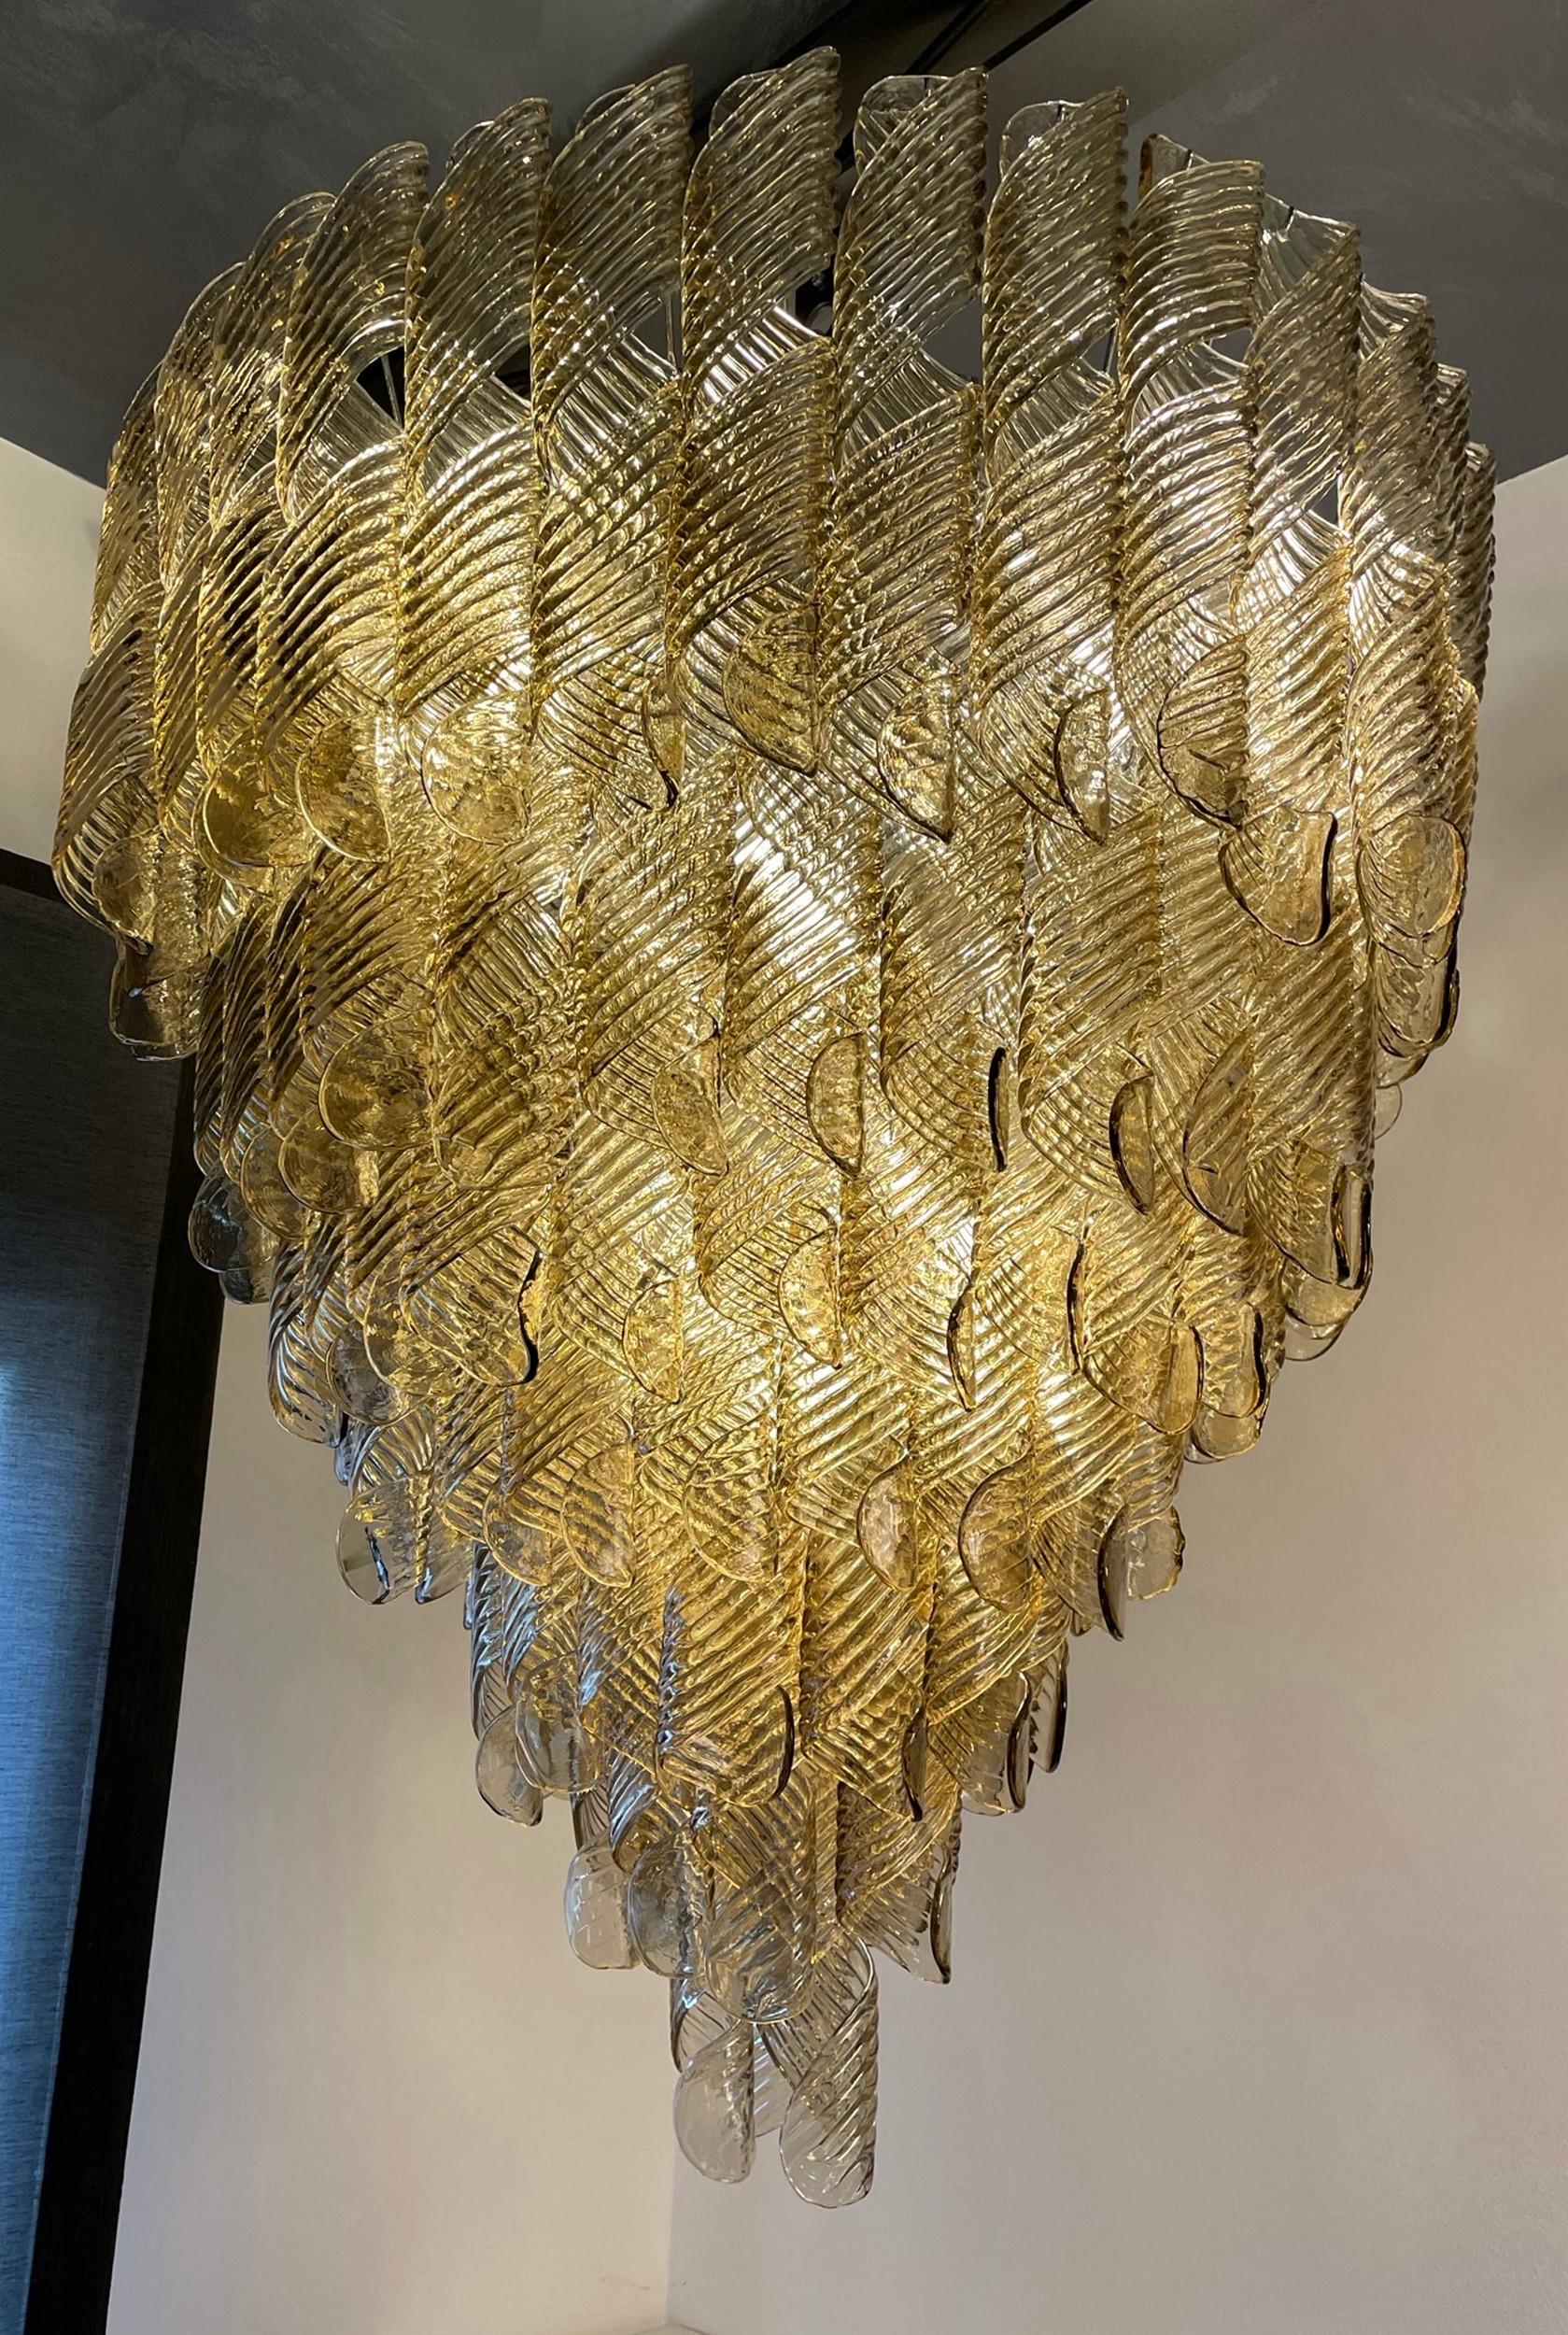 Iron Monumental Chandelier, Murano Fume Glass in Spiral Ribbed Elements, 7 Tiers